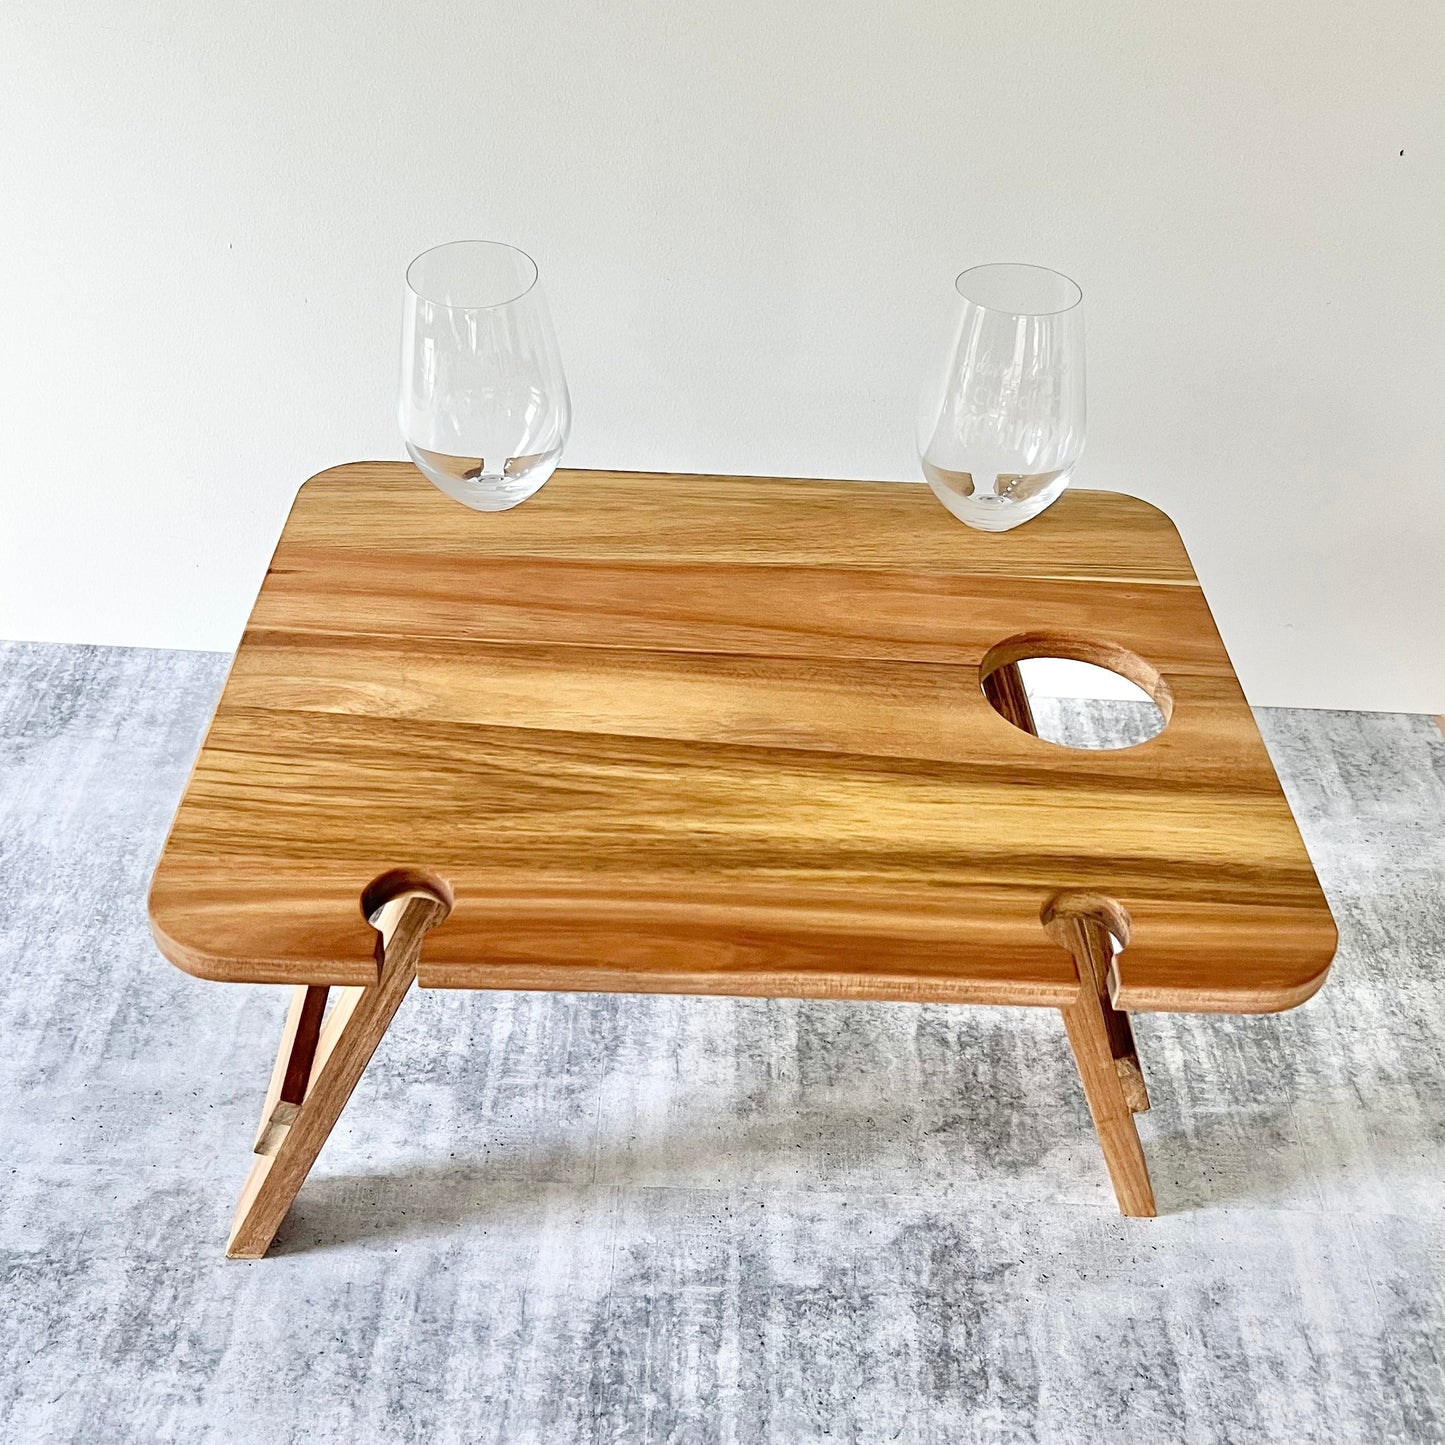 Pour The Wine Cheese Wine & Cheese Picnic Table